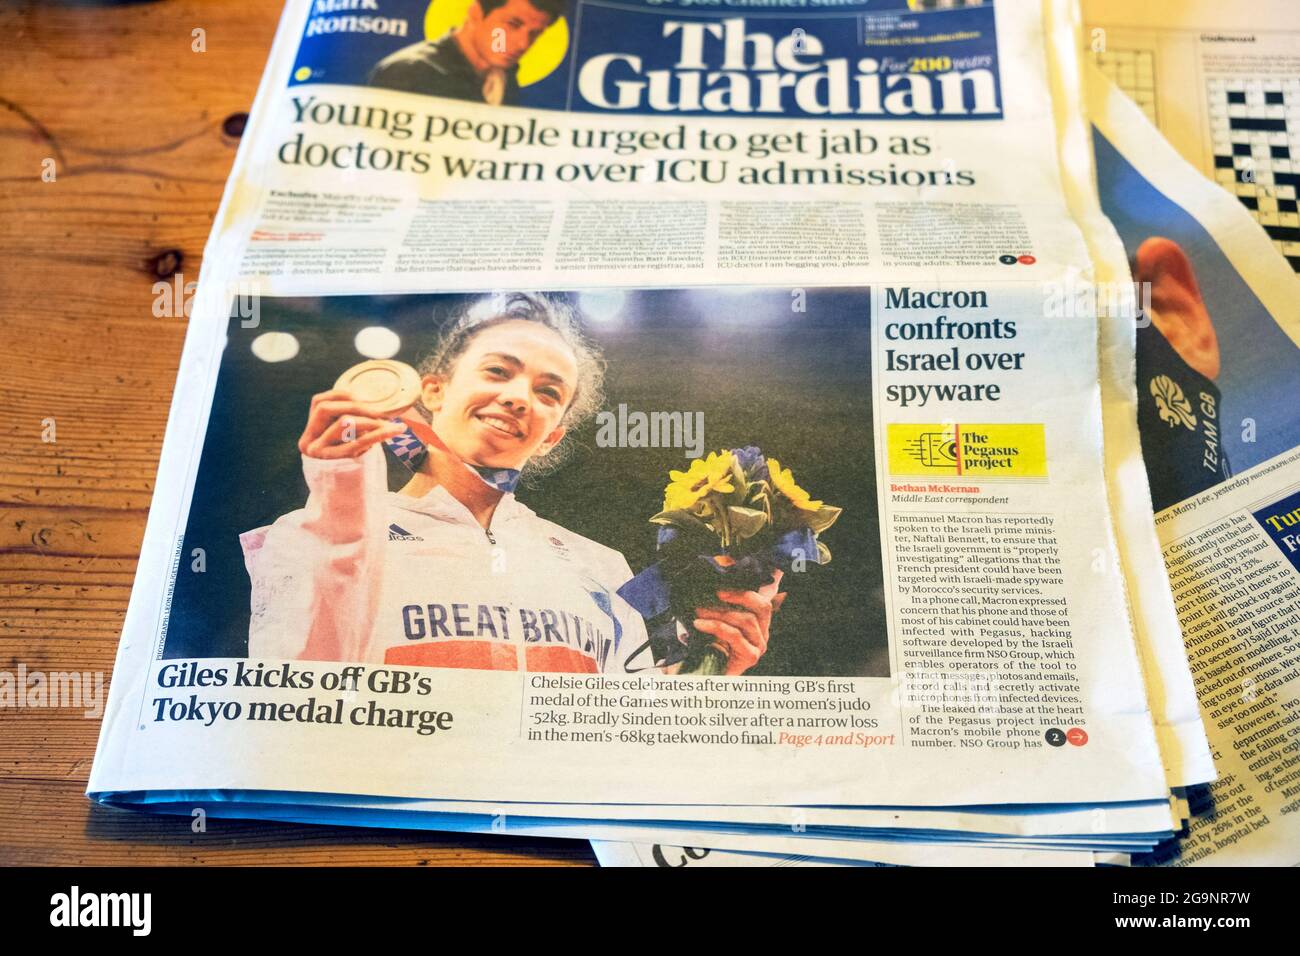 Chelsea Giles On Front Page Guardian Newspaper Headline Headlines After Winning Bronze Medal At Tokyo Olympics On 25 July 21 London Uk Stock Photo Alamy